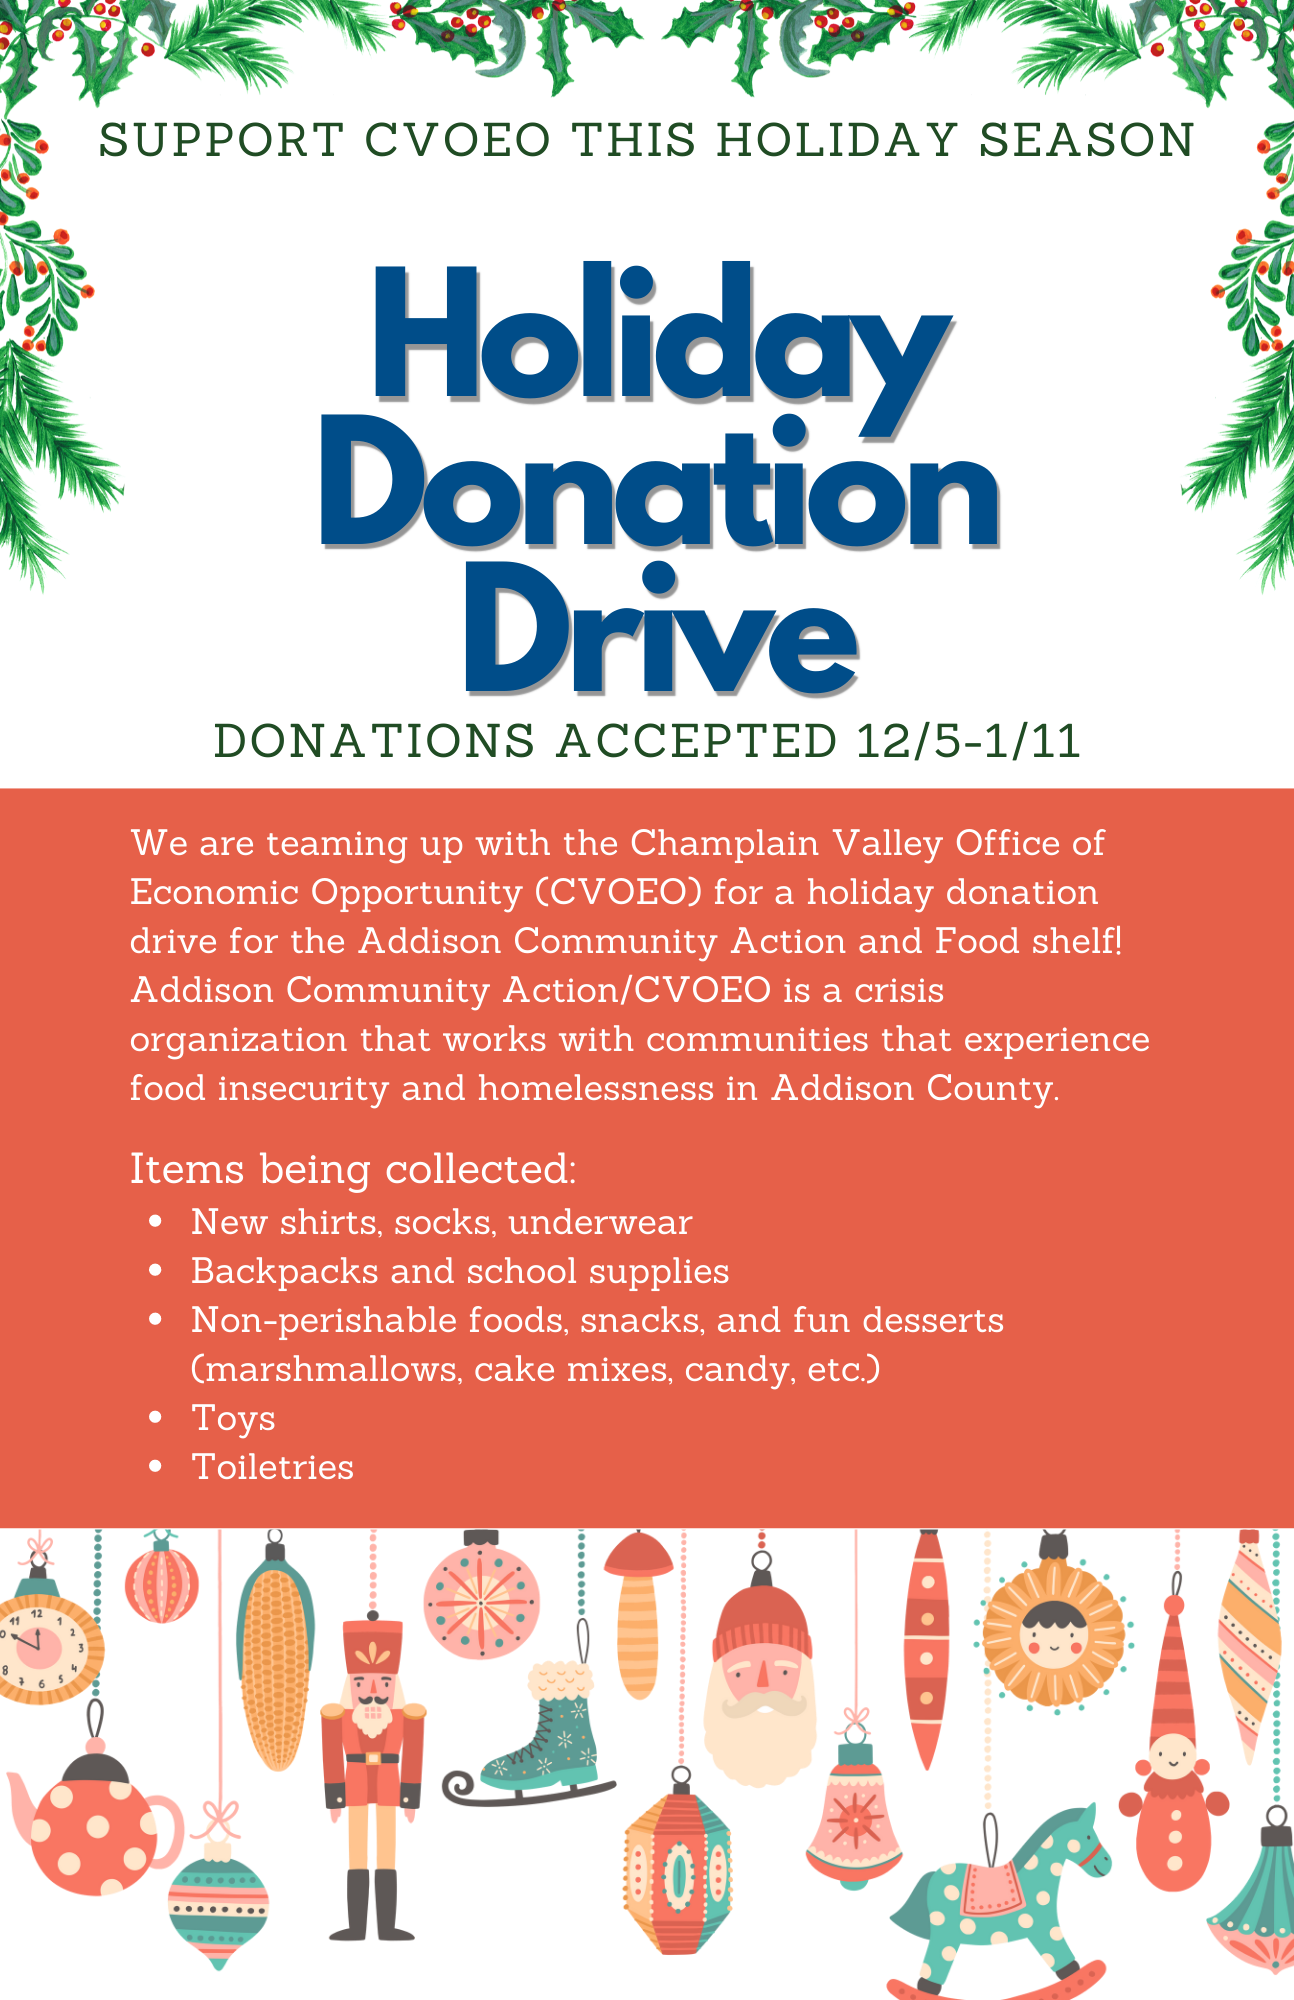 Support CVOEO Through A Holiday Donation Drive